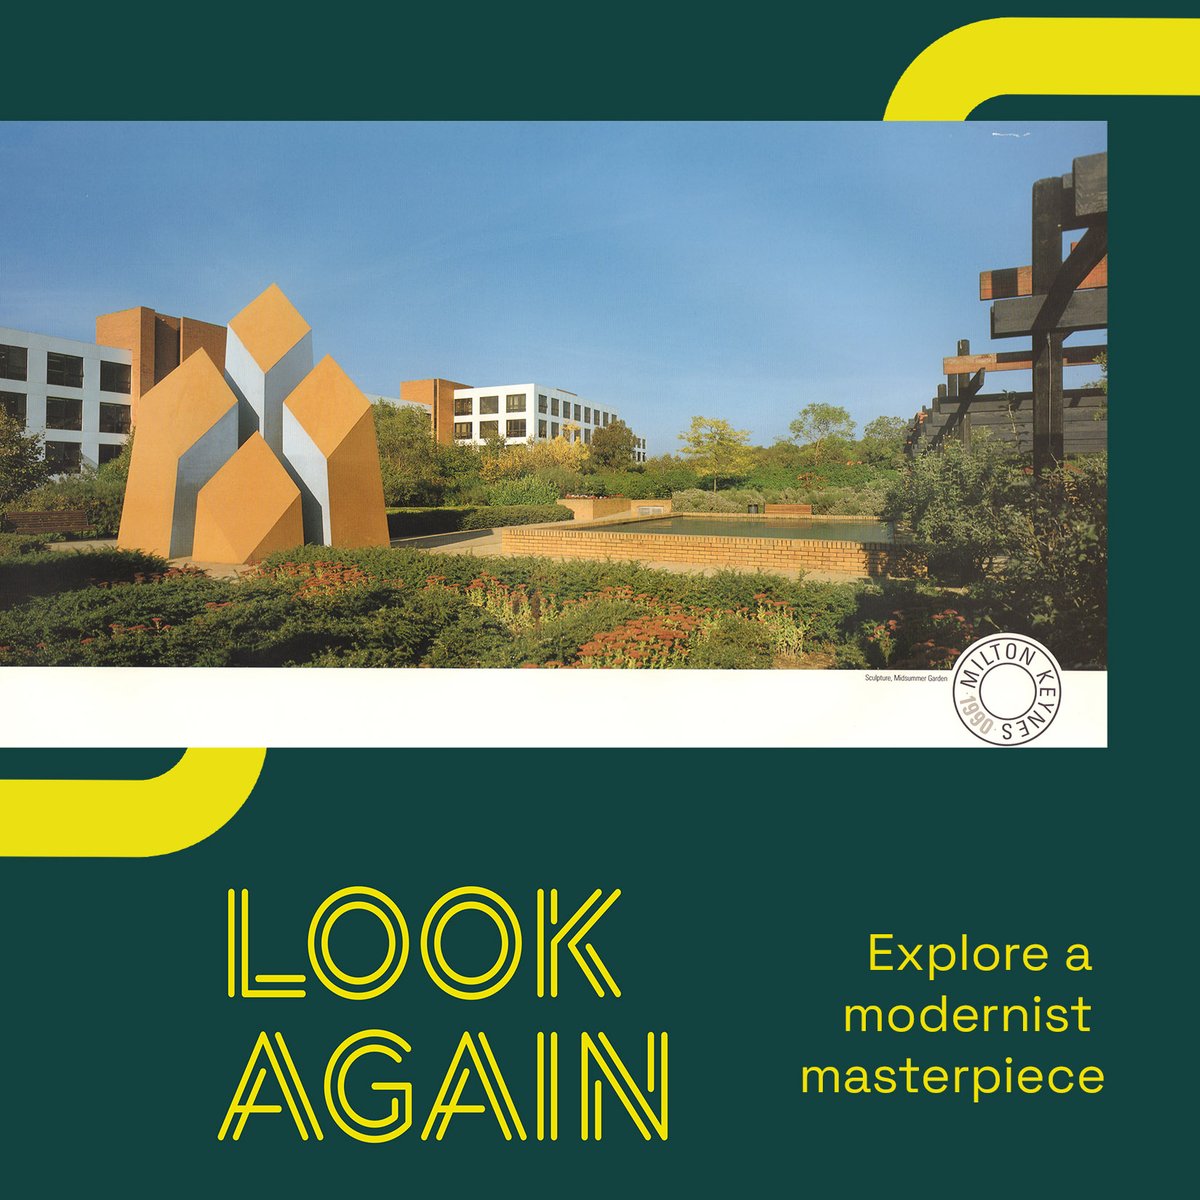 📢 NEW LAUNCH 📢 👀 Look Again is your guide to #MiltonKeynes’ standout modern heritage, public art, architecture and design. This FREE new trail around CMK gets you off the beaten track to discover stories all around you! Get started: lookagainmk.city #LookAgainMK #LoveMK